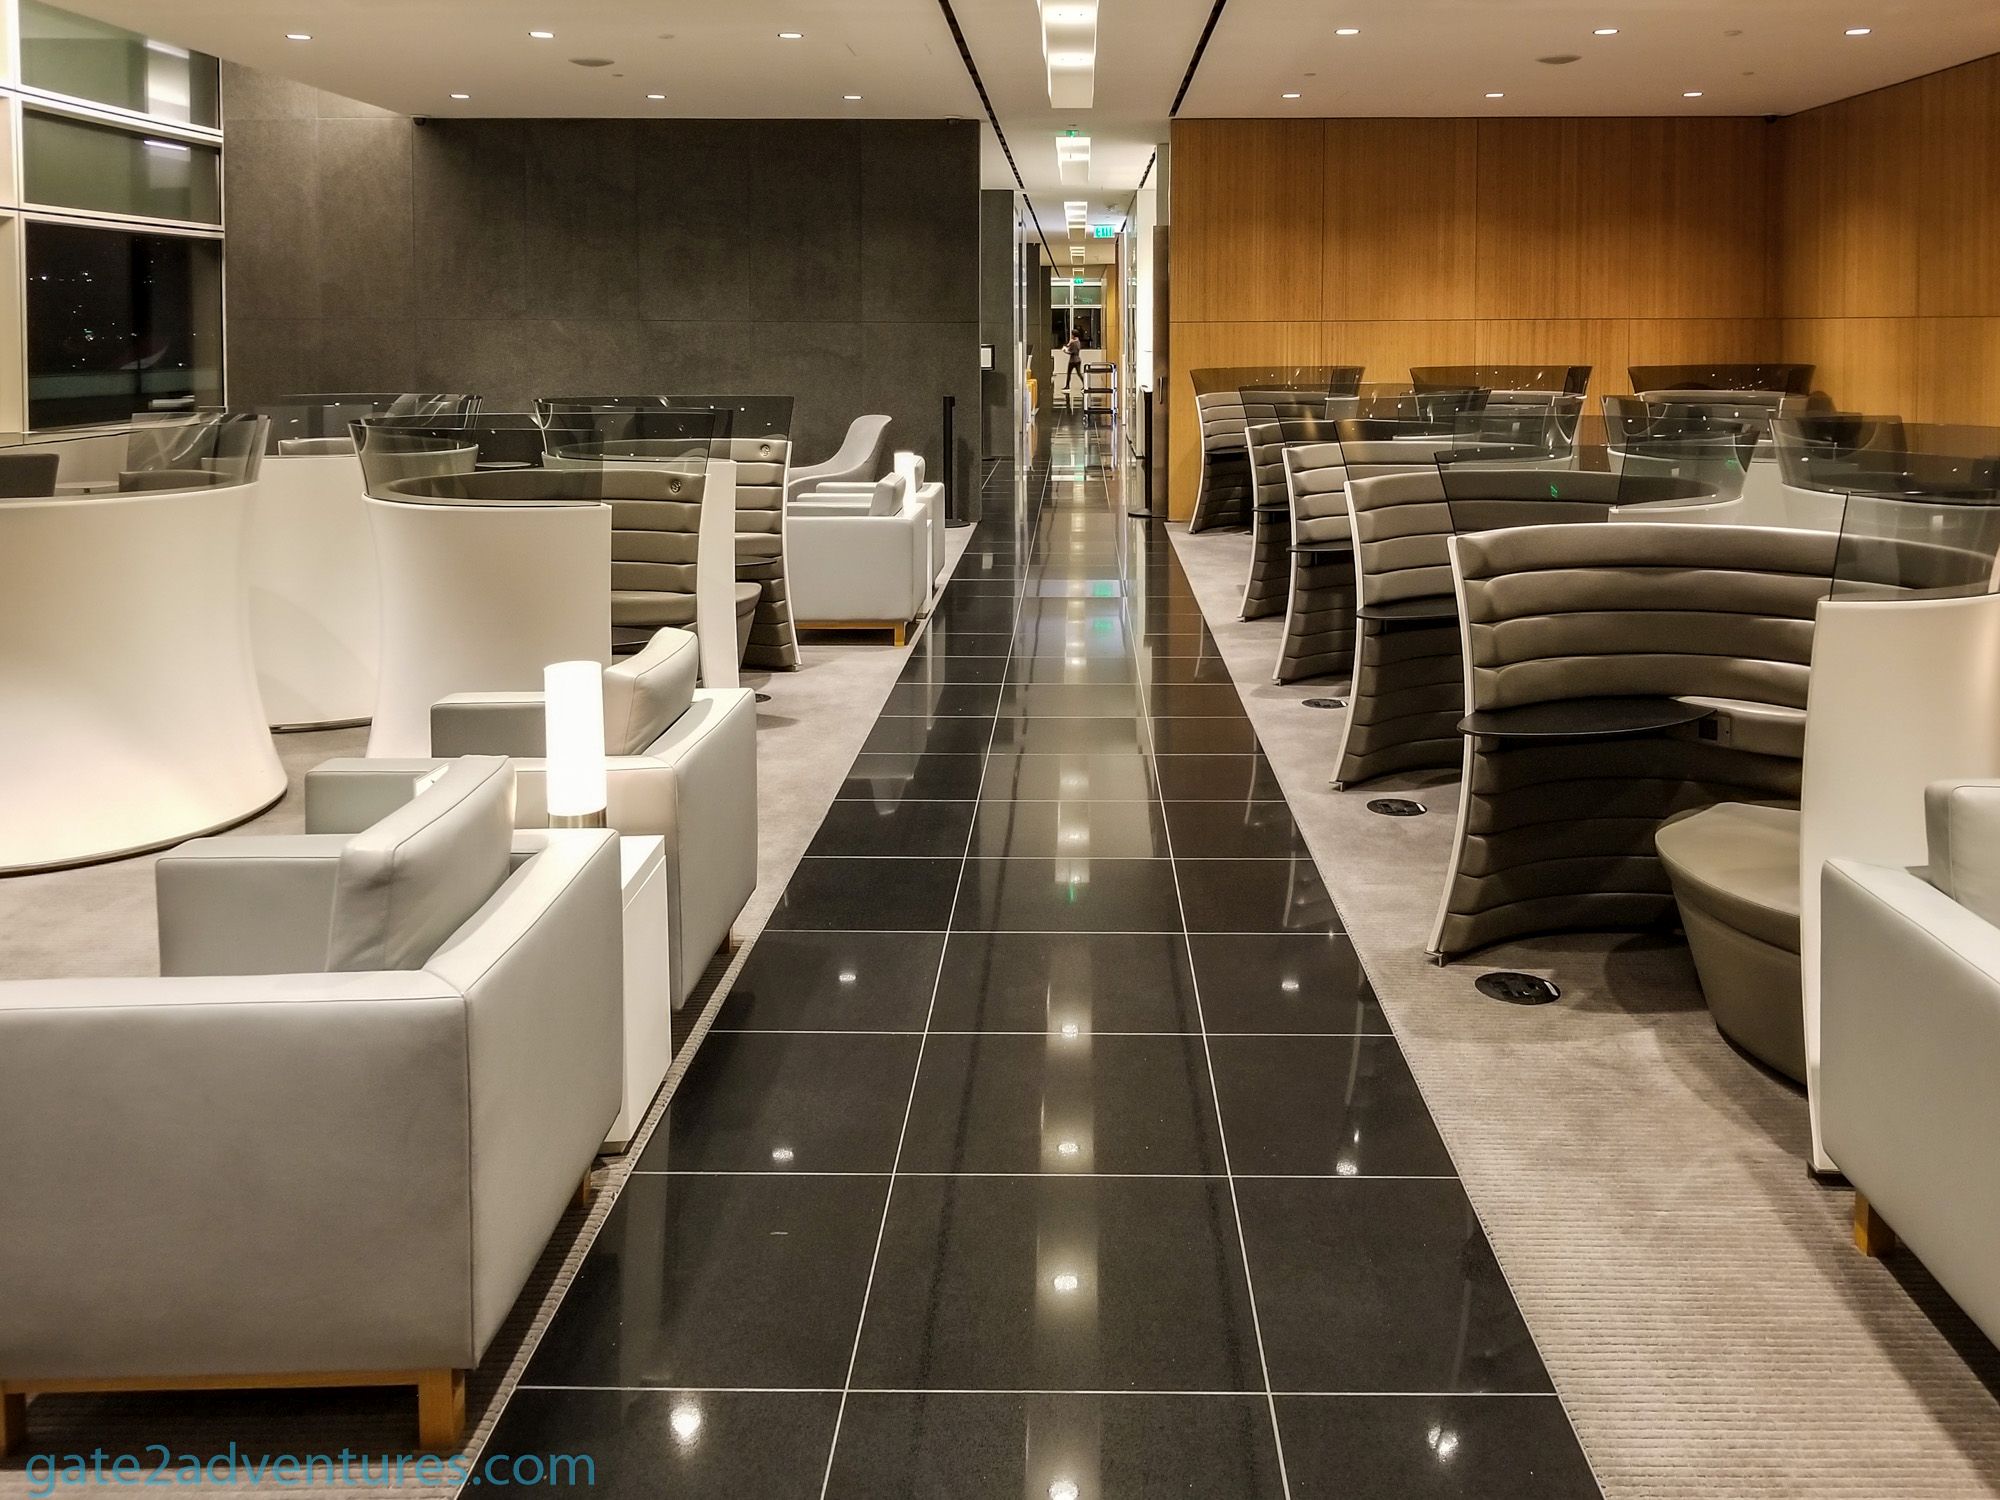 Cathay Pacific First and Business Class Lounge - San Francisco International Airport